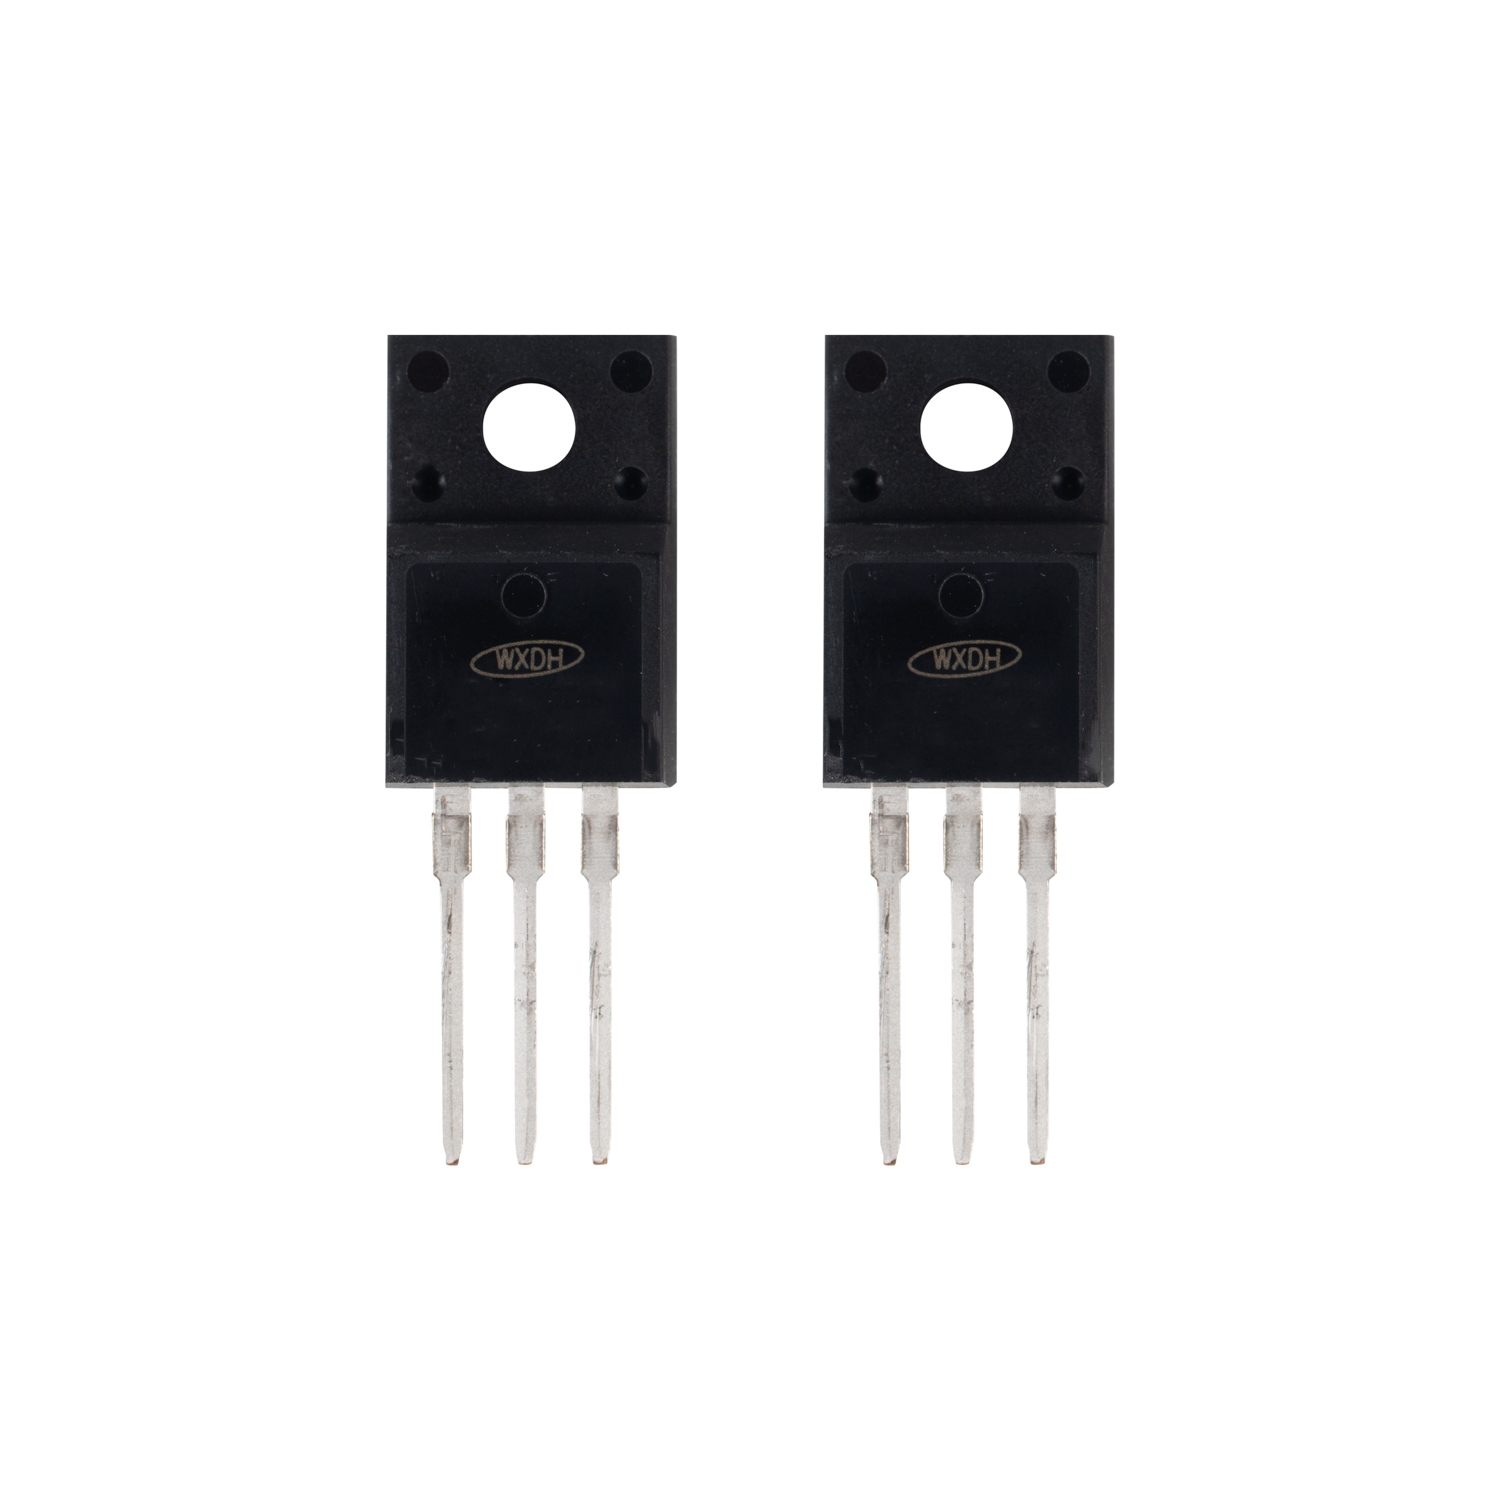 310A 20V N-channel Enhancement Mode Power MOSFET